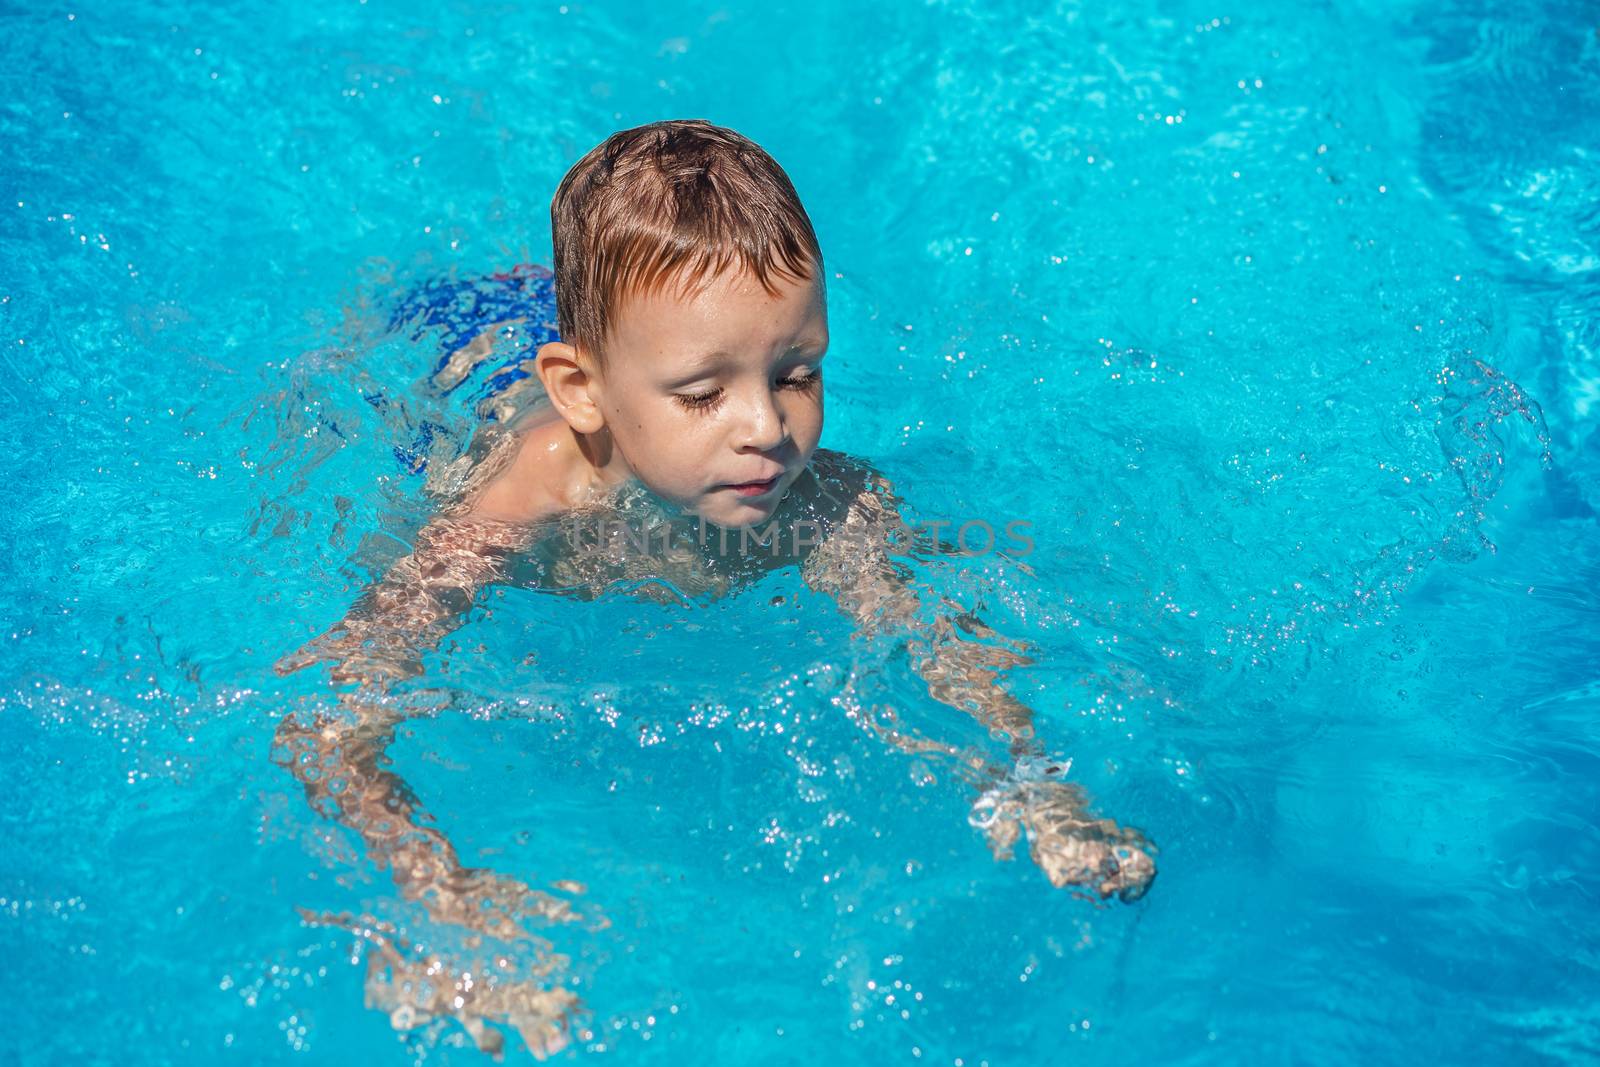 Happy kid playing in blue water of swimming pool. Little boy learning to swim. Summer vacations concept. Cute boy swimming in pool water. Child splashing and having fun in swimming pool